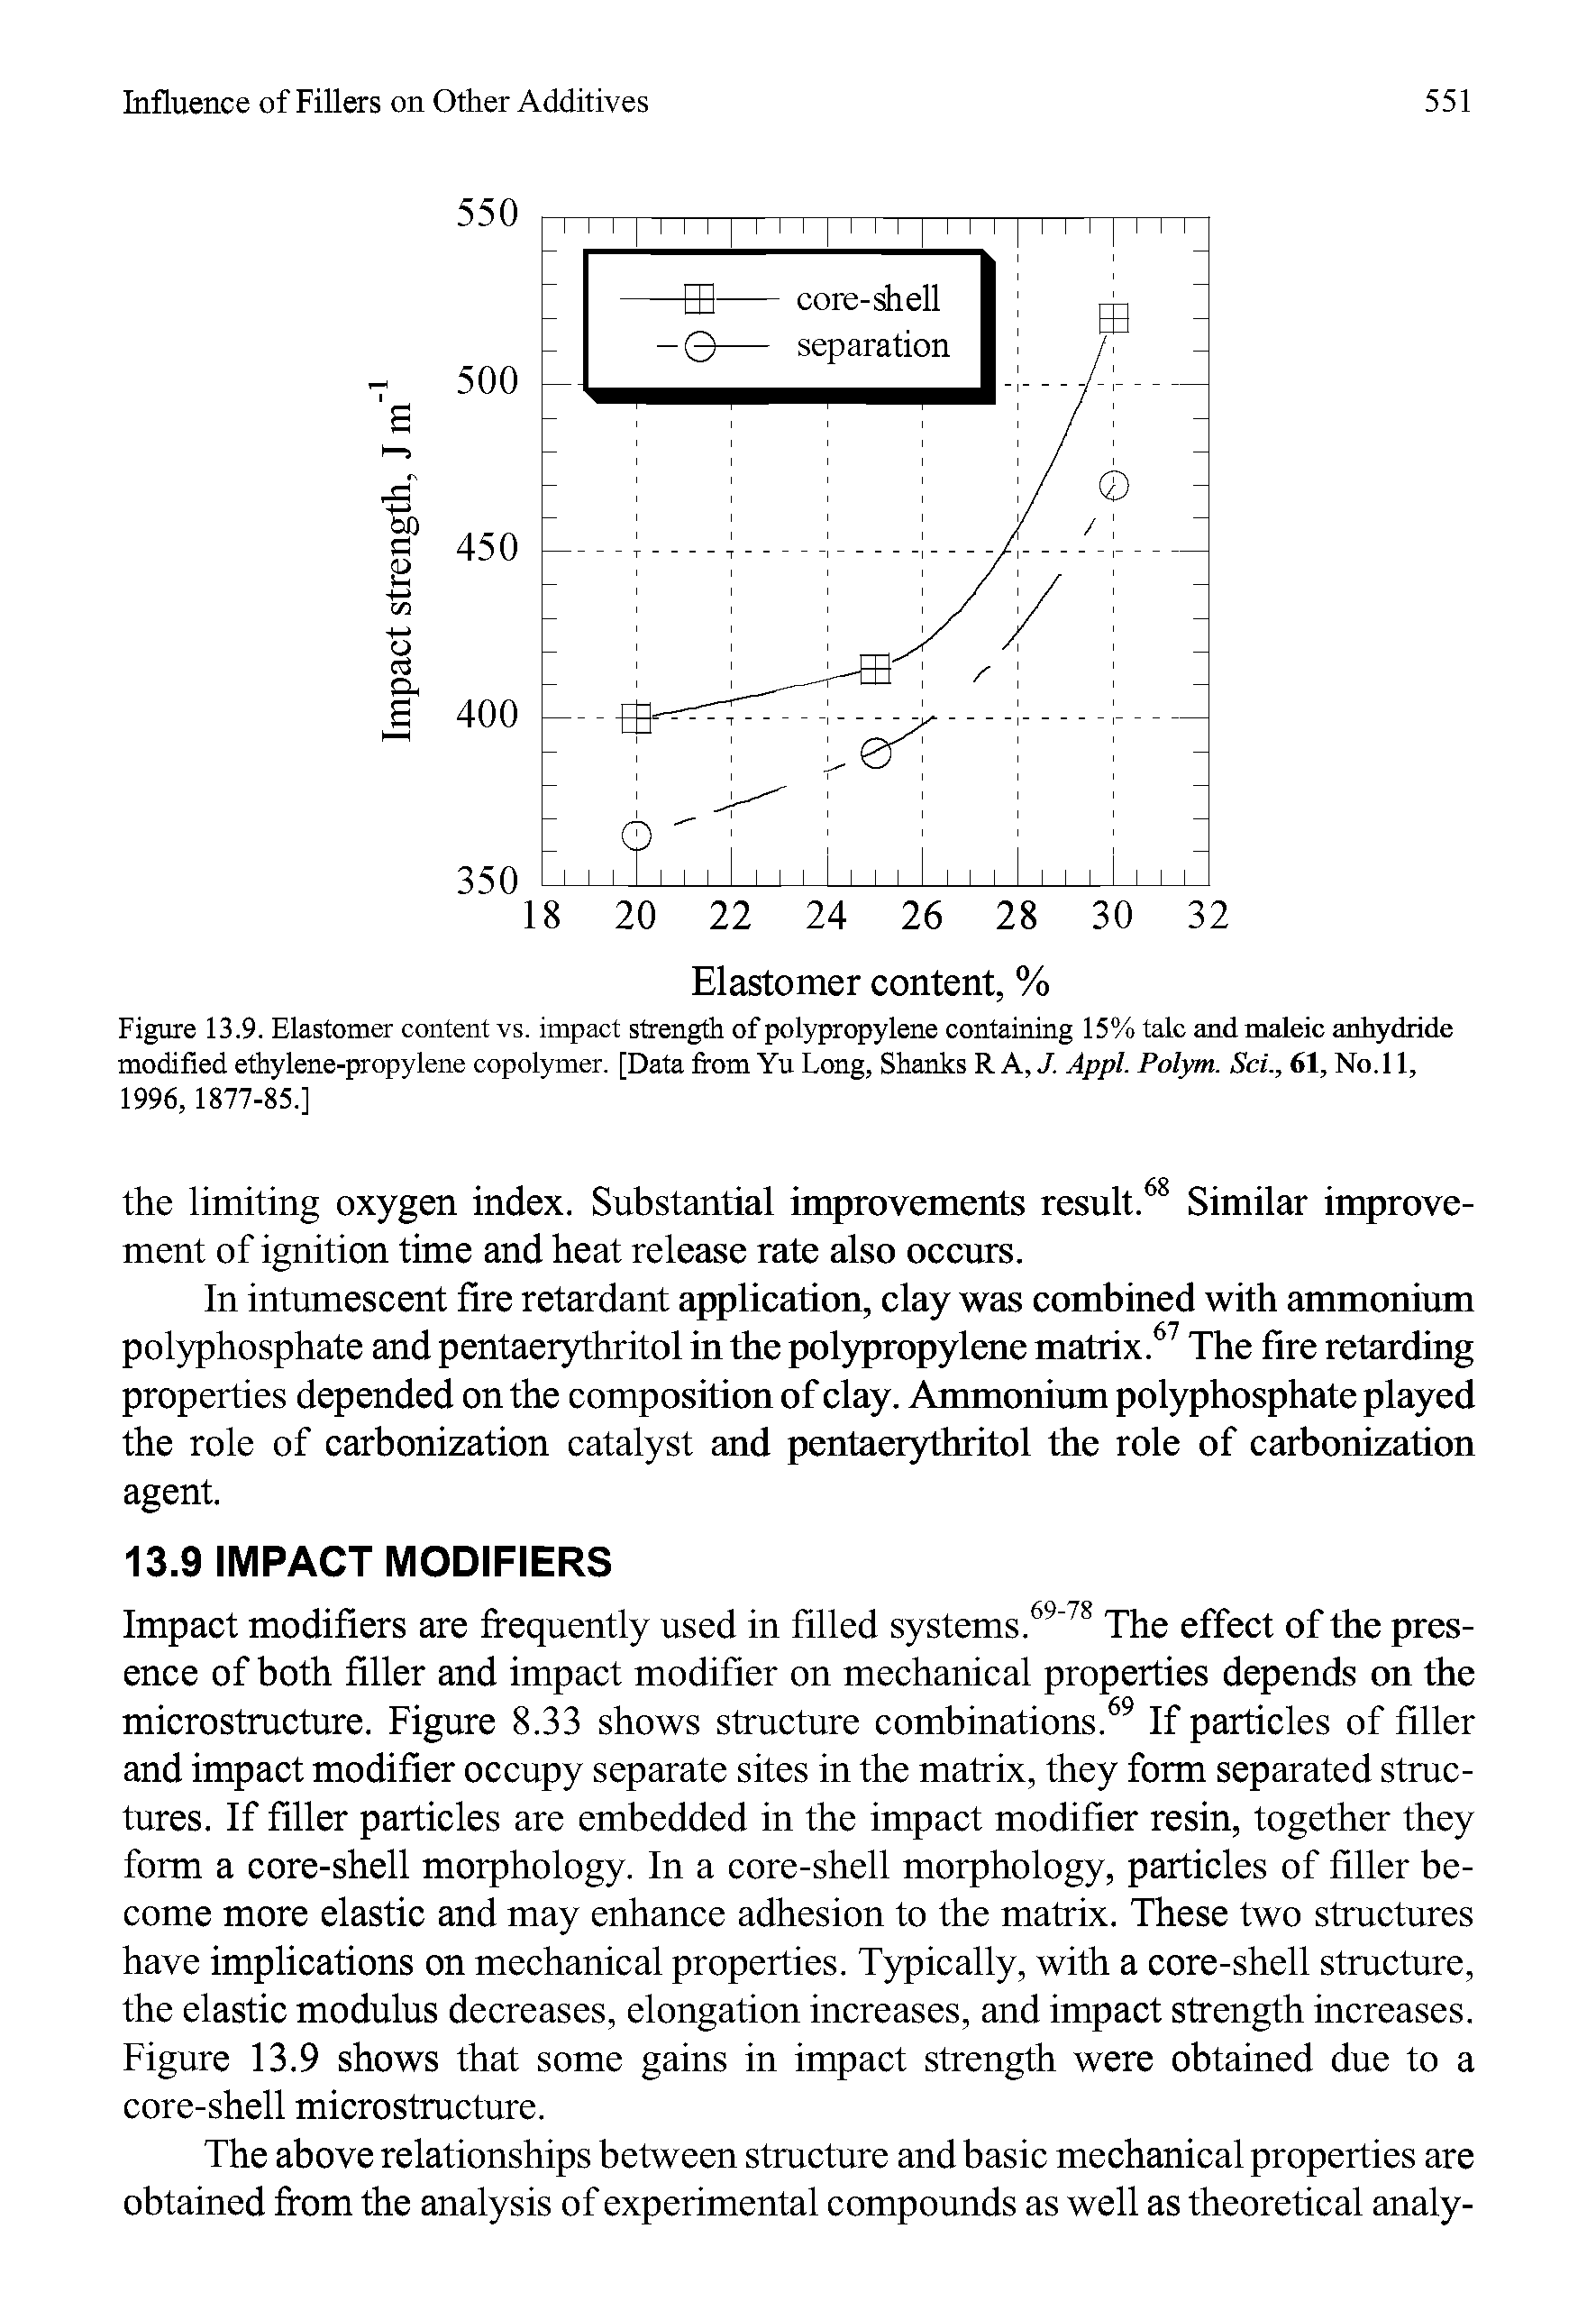 Figure 13.9. Elastomer content vs. impact strength of polypropylene containing 15% talc and maleic anhydride modified ethylene-propylene copolymer. [Data from Yu Long, Shanks R A, J. Appl. Polym. Sci., 61, No. 11, 1996,1877-85.]...